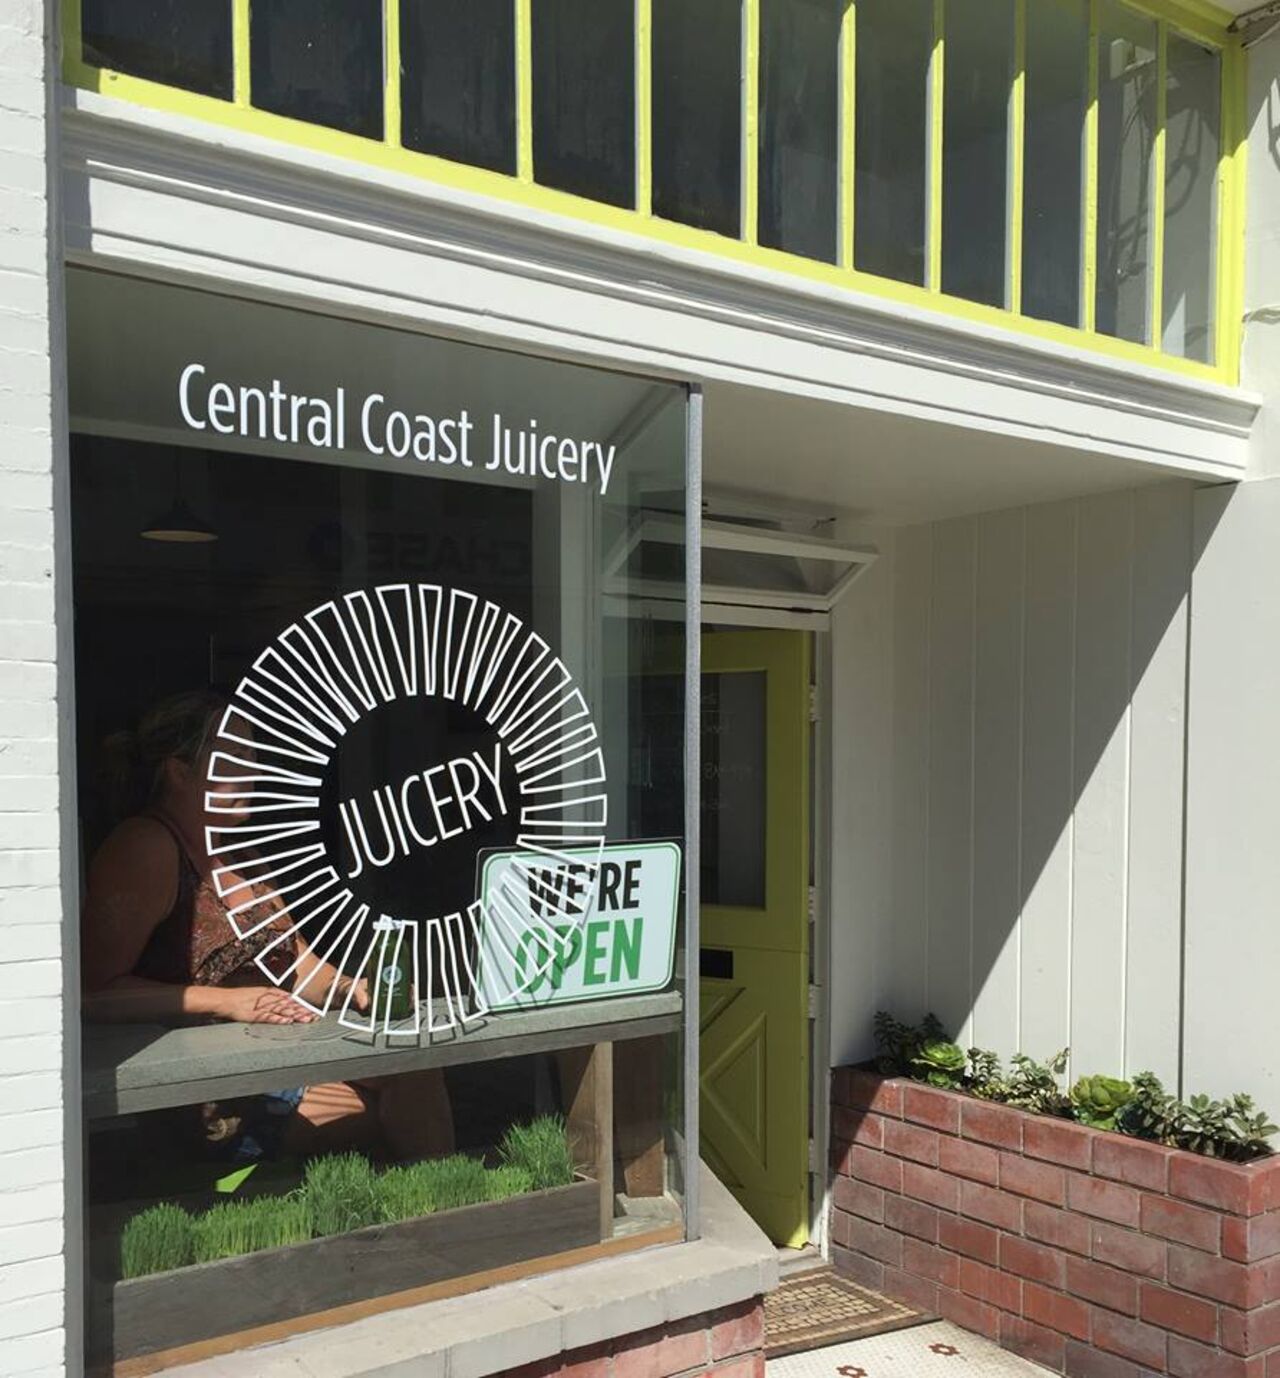 A photo of Central Coast Juicery